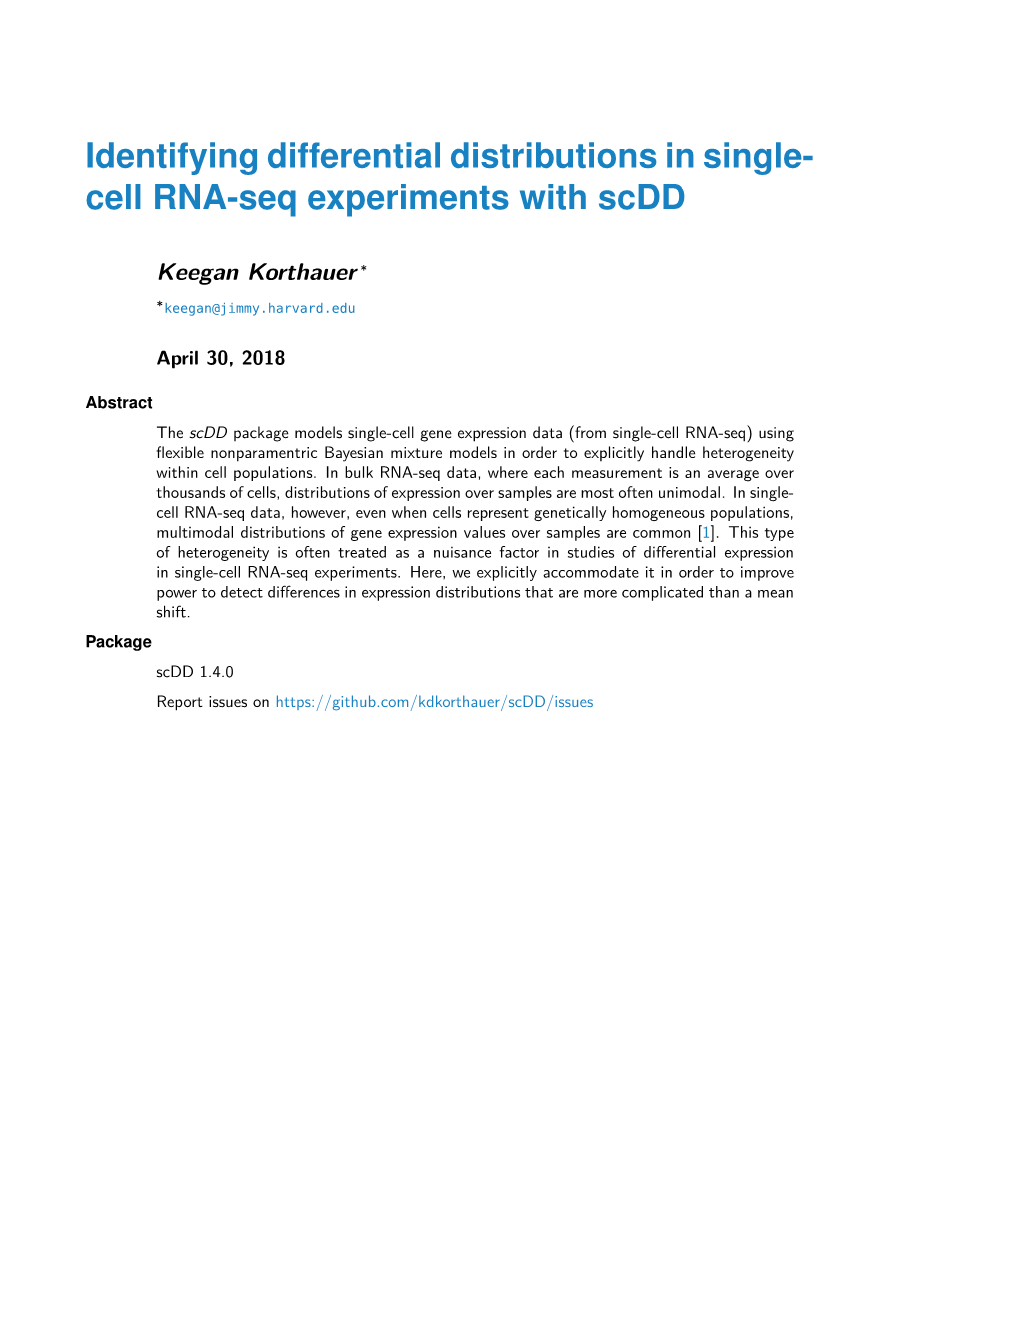 Identifying Differential Distributions in Single-Cell RNA-Seq